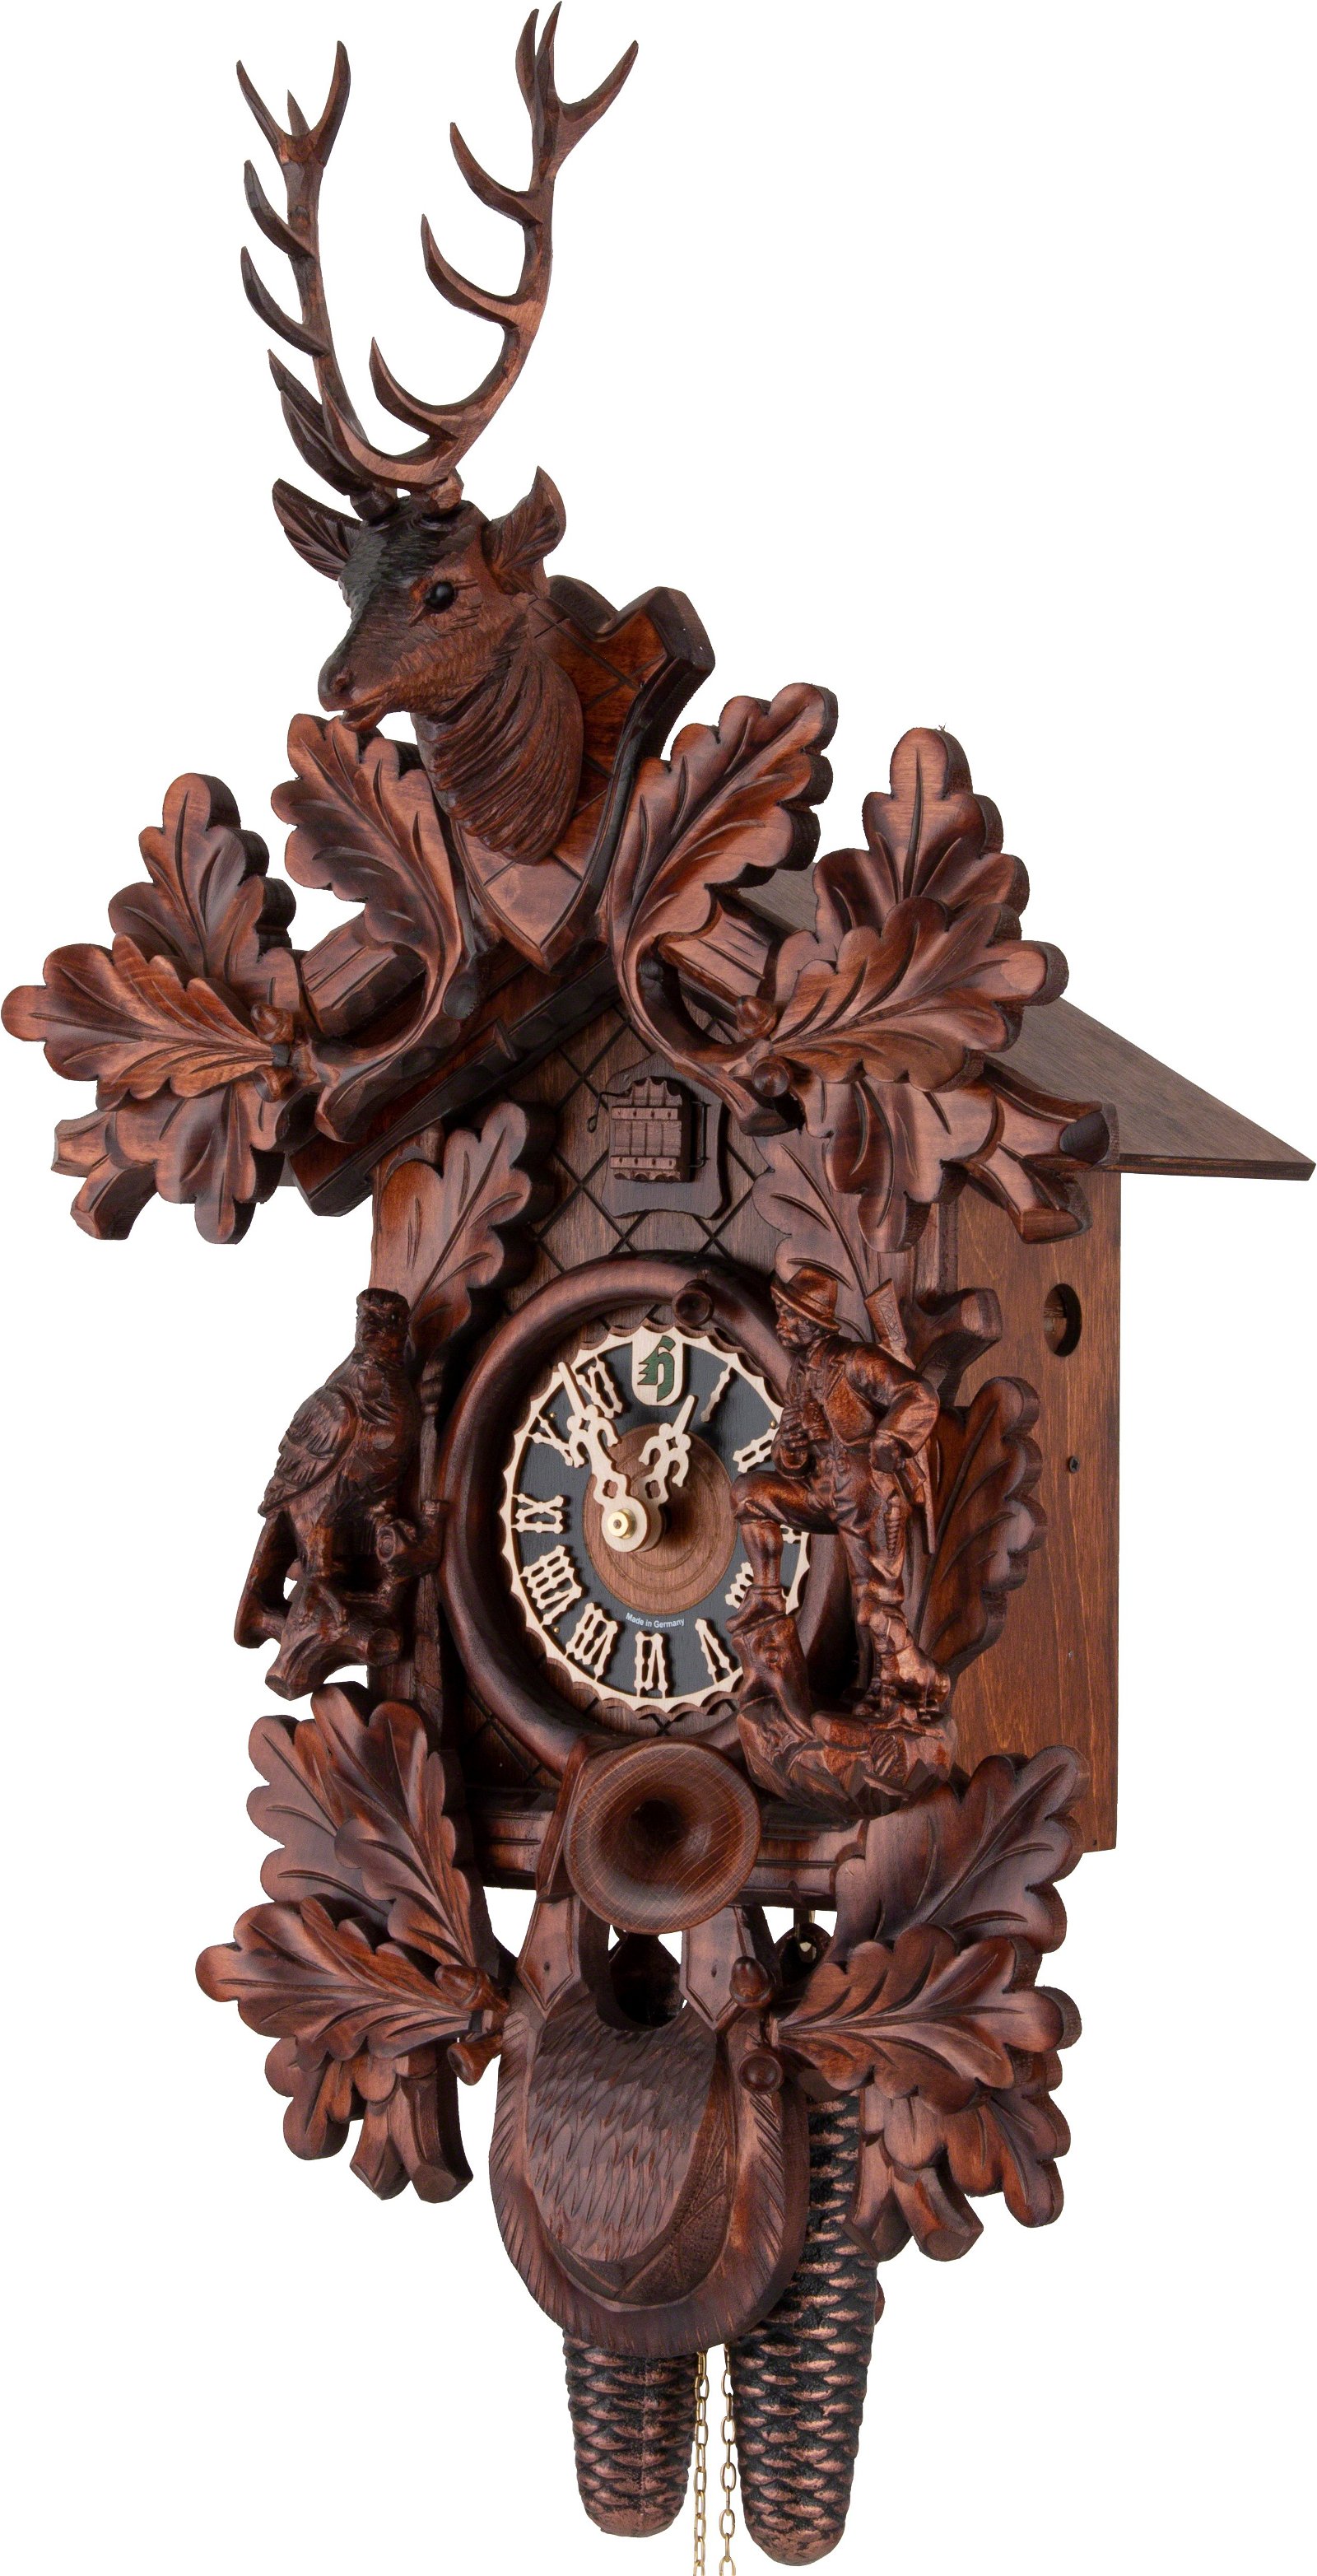 Cuckoo Clock Carved Style 8 Day Movement 71cm by Hönes